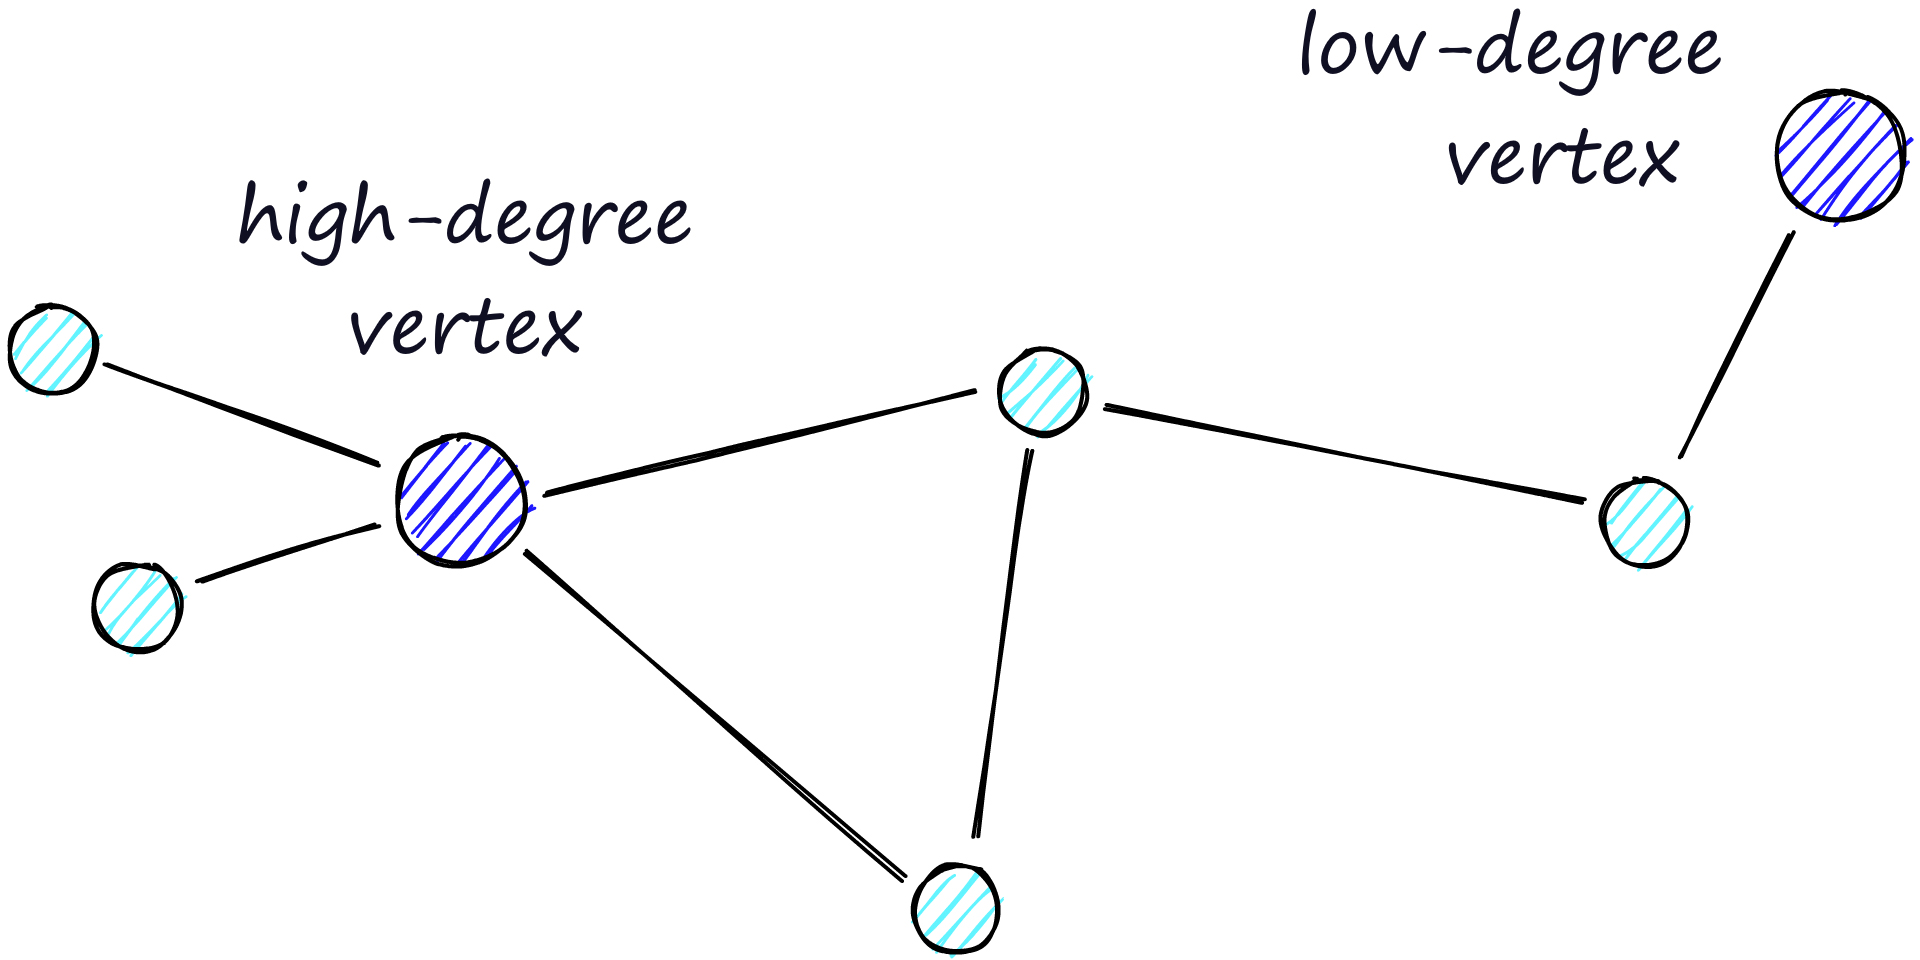 High-degree vertices have many links, whereas low-degree vertices have very few links.